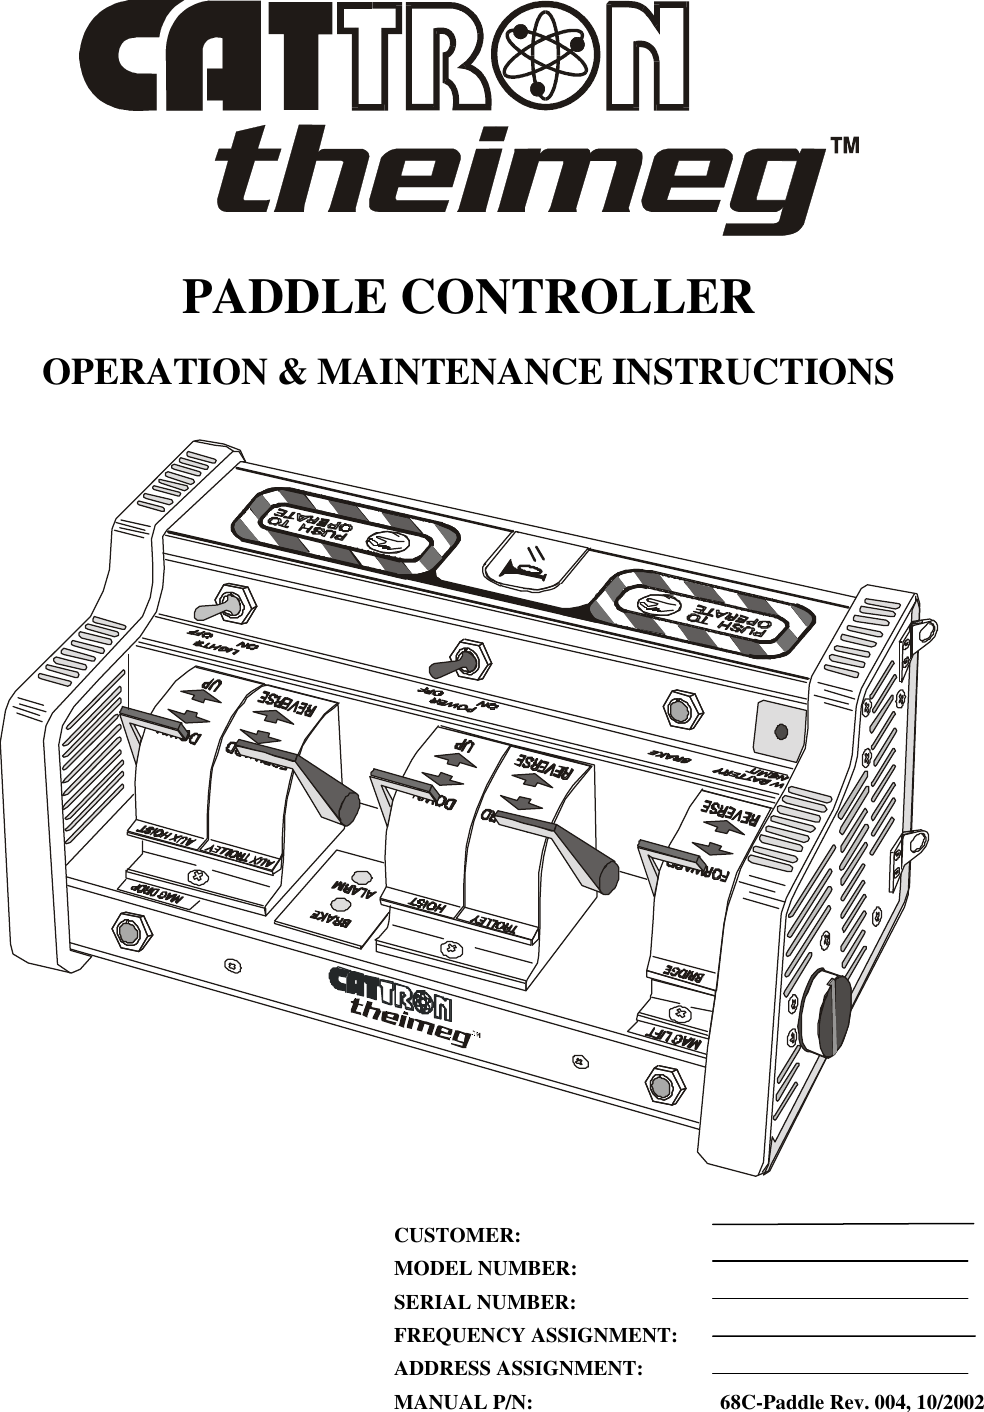  PADDLE CONTROLLER OPERATION &amp; MAINTENANCE INSTRUCTIONS     CUSTOMER: MODEL NUMBER:  SERIAL NUMBER: FREQUENCY ASSIGNMENT: ADDRESS ASSIGNMENT: MANUAL P/N:          68C-Paddle Rev. 004, 10/2002 